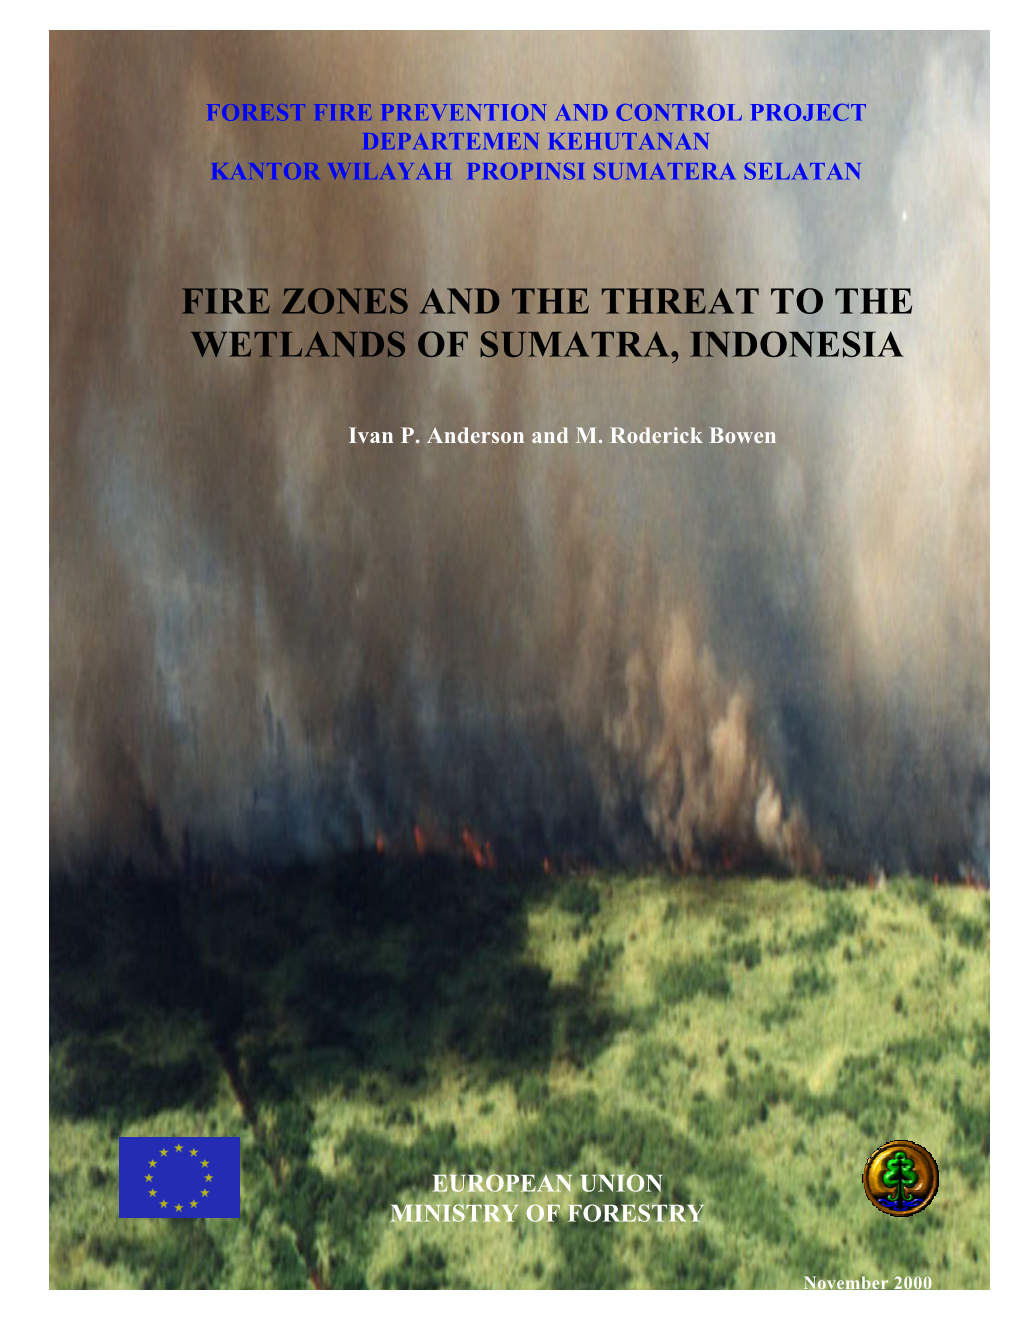 Fire Zones and the Threat to the Wetlands of Sumatra, Indonesia